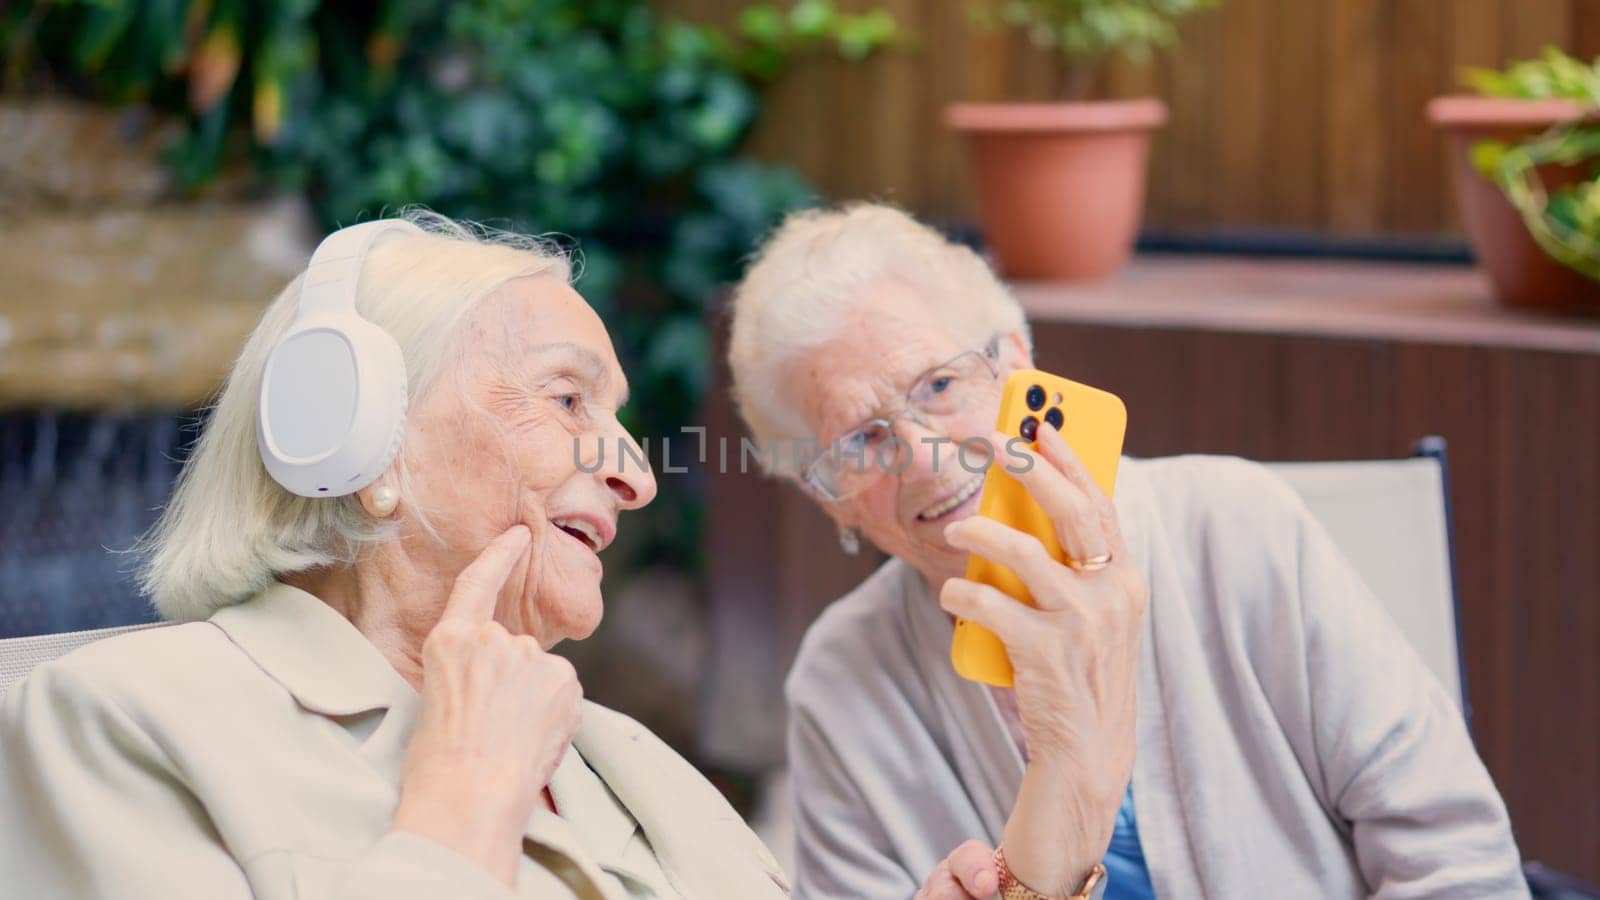 Seniors having fun with the mobile in a nursing home by ivanmoreno